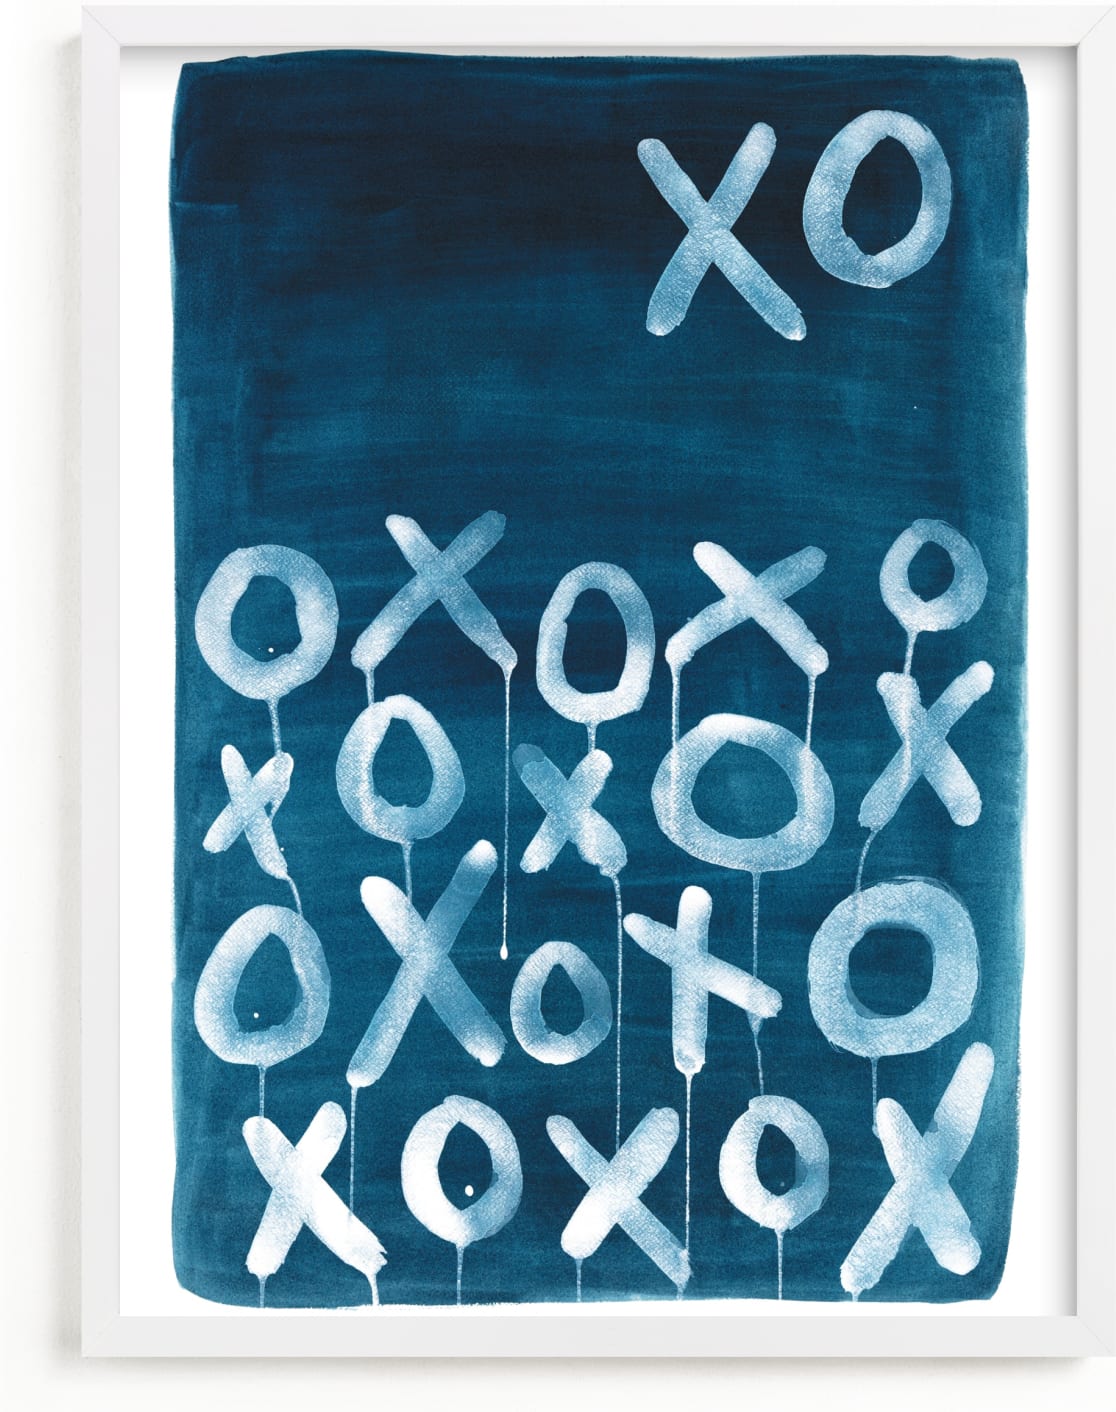 This is a blue art by Michelle Owenby Design called XO Lunar.